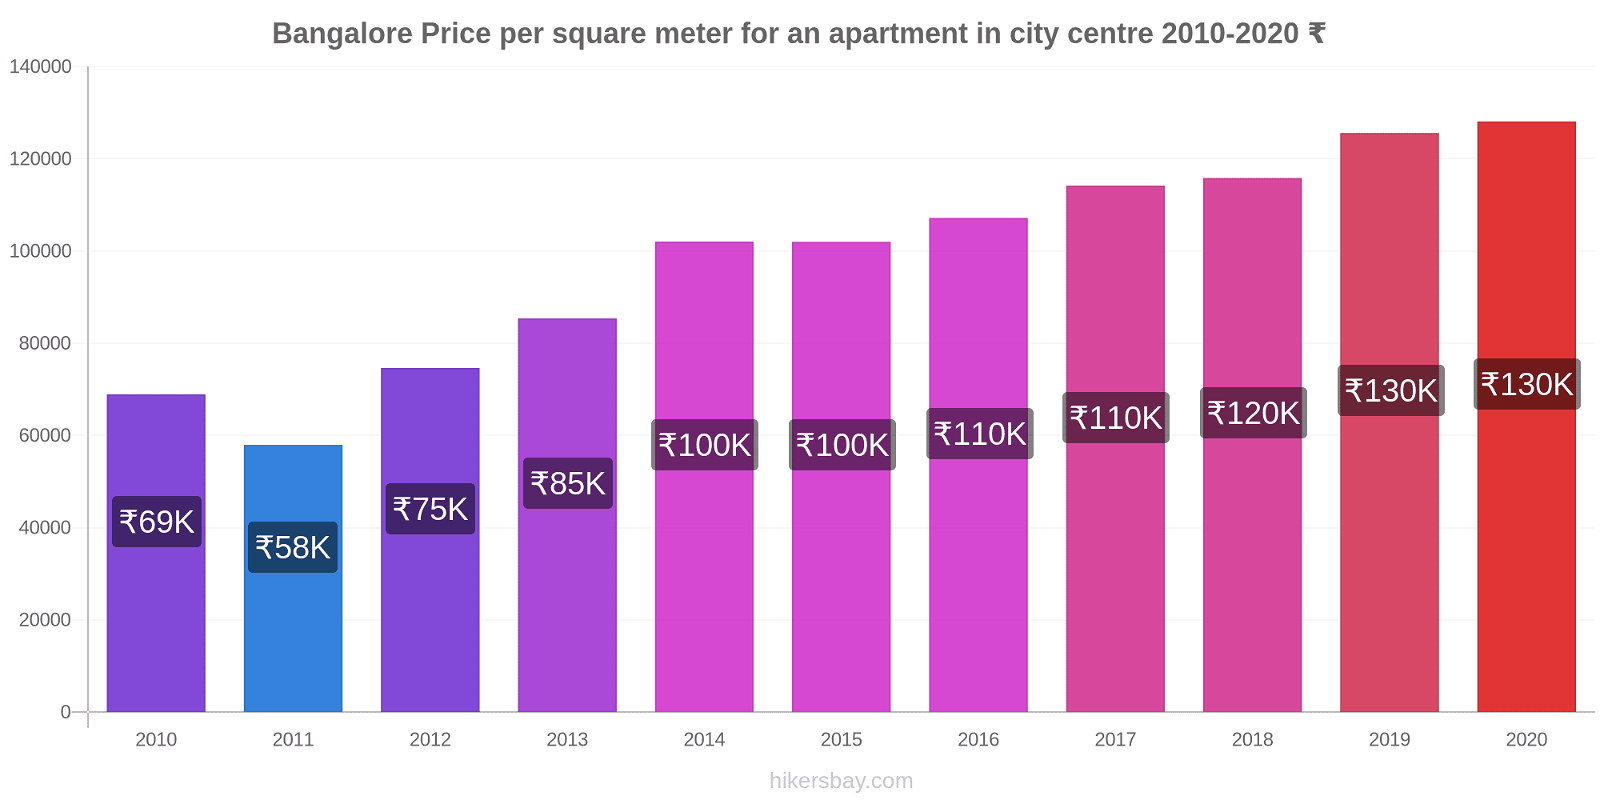 Bangalore price changes Price per square meter for an apartment in city centre hikersbay.com